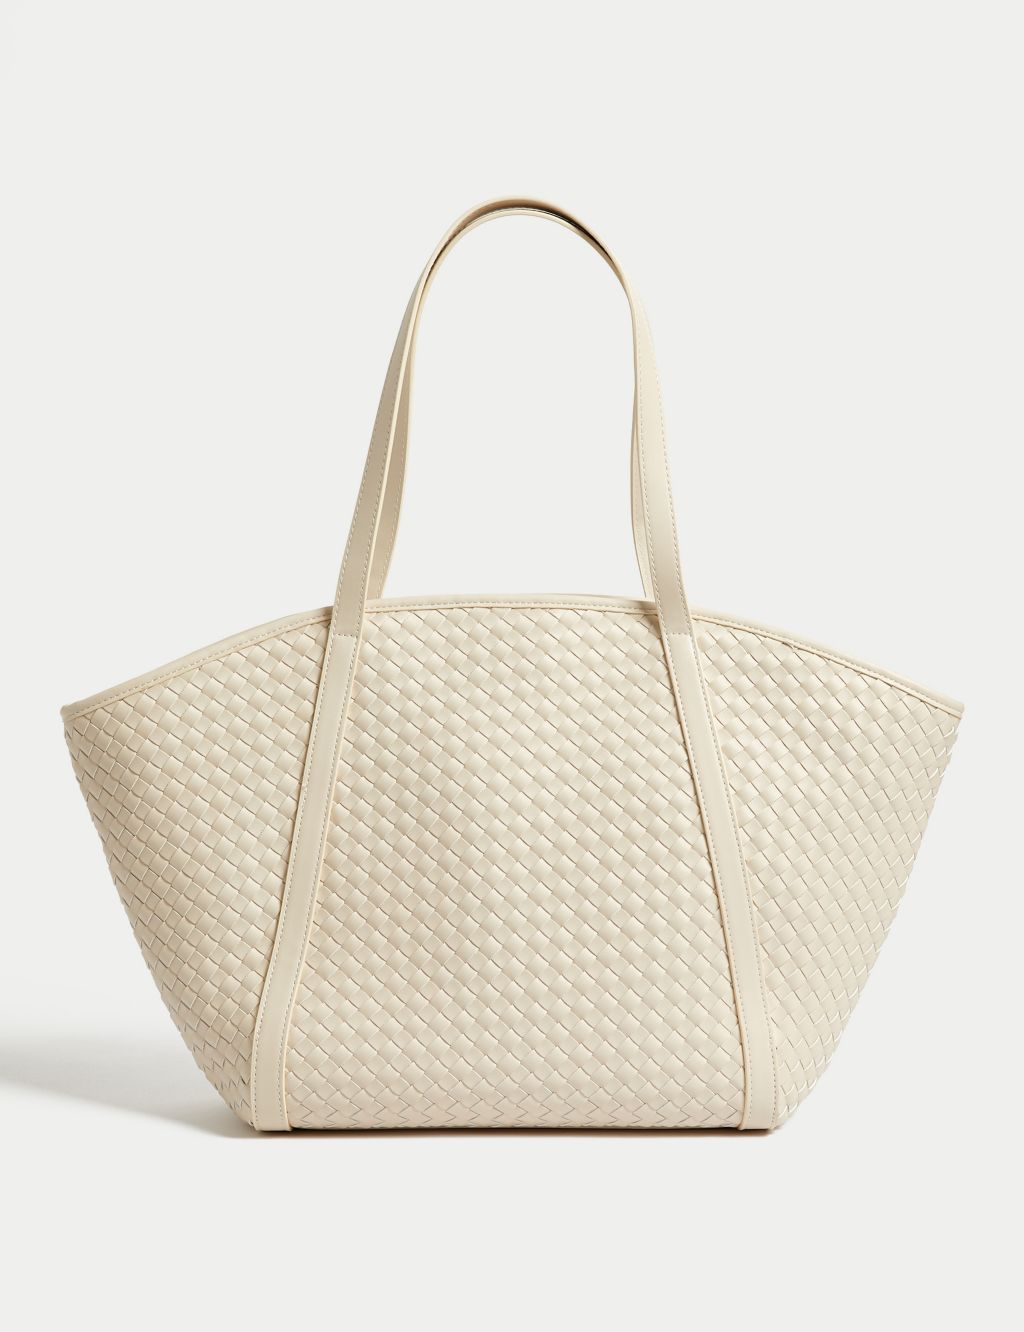 Faux Leather Woven Tote Shopper image 1